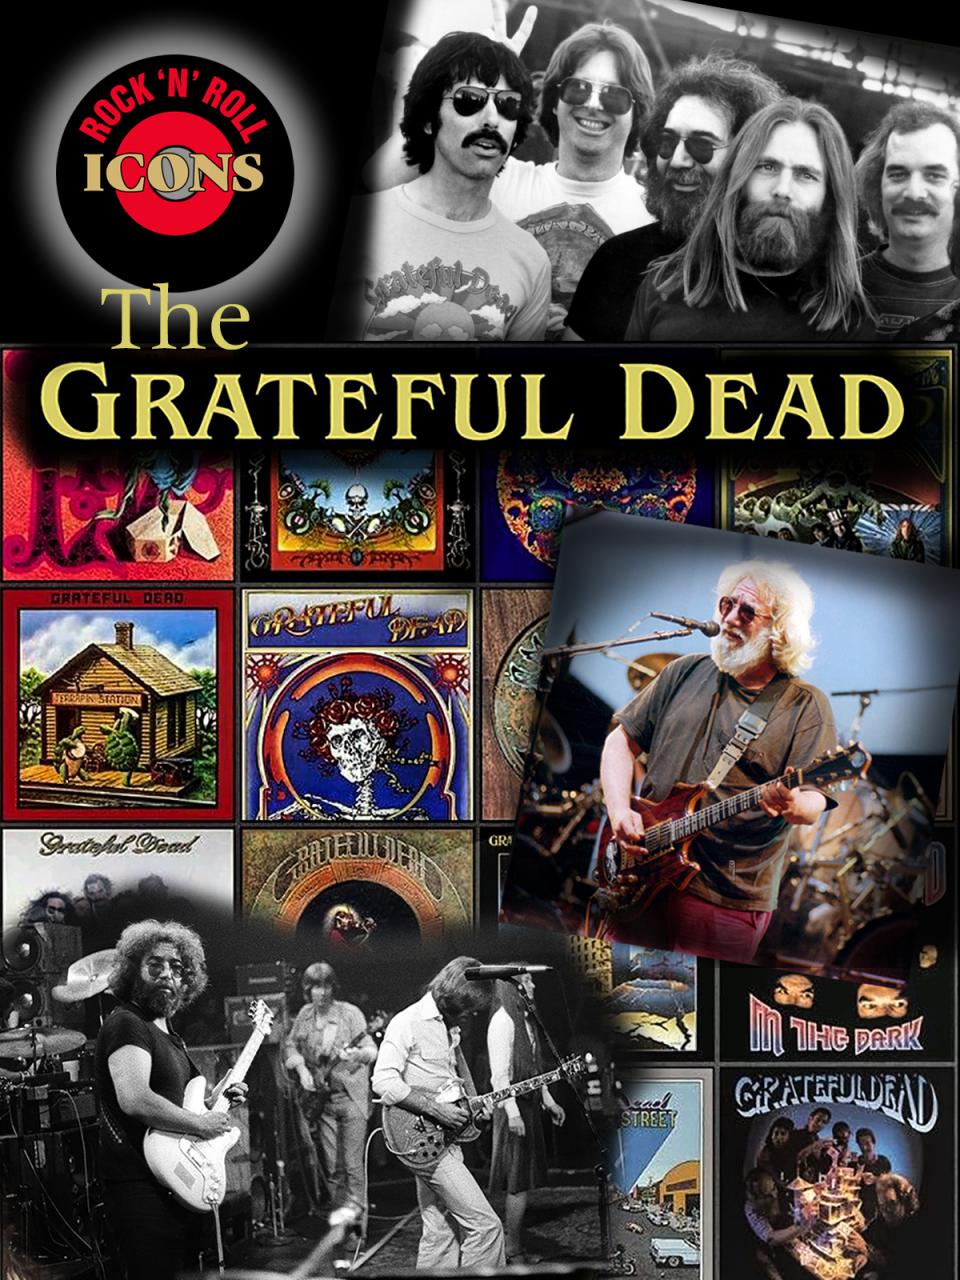 Rock 'n Roll Icons: The Grateful Dead